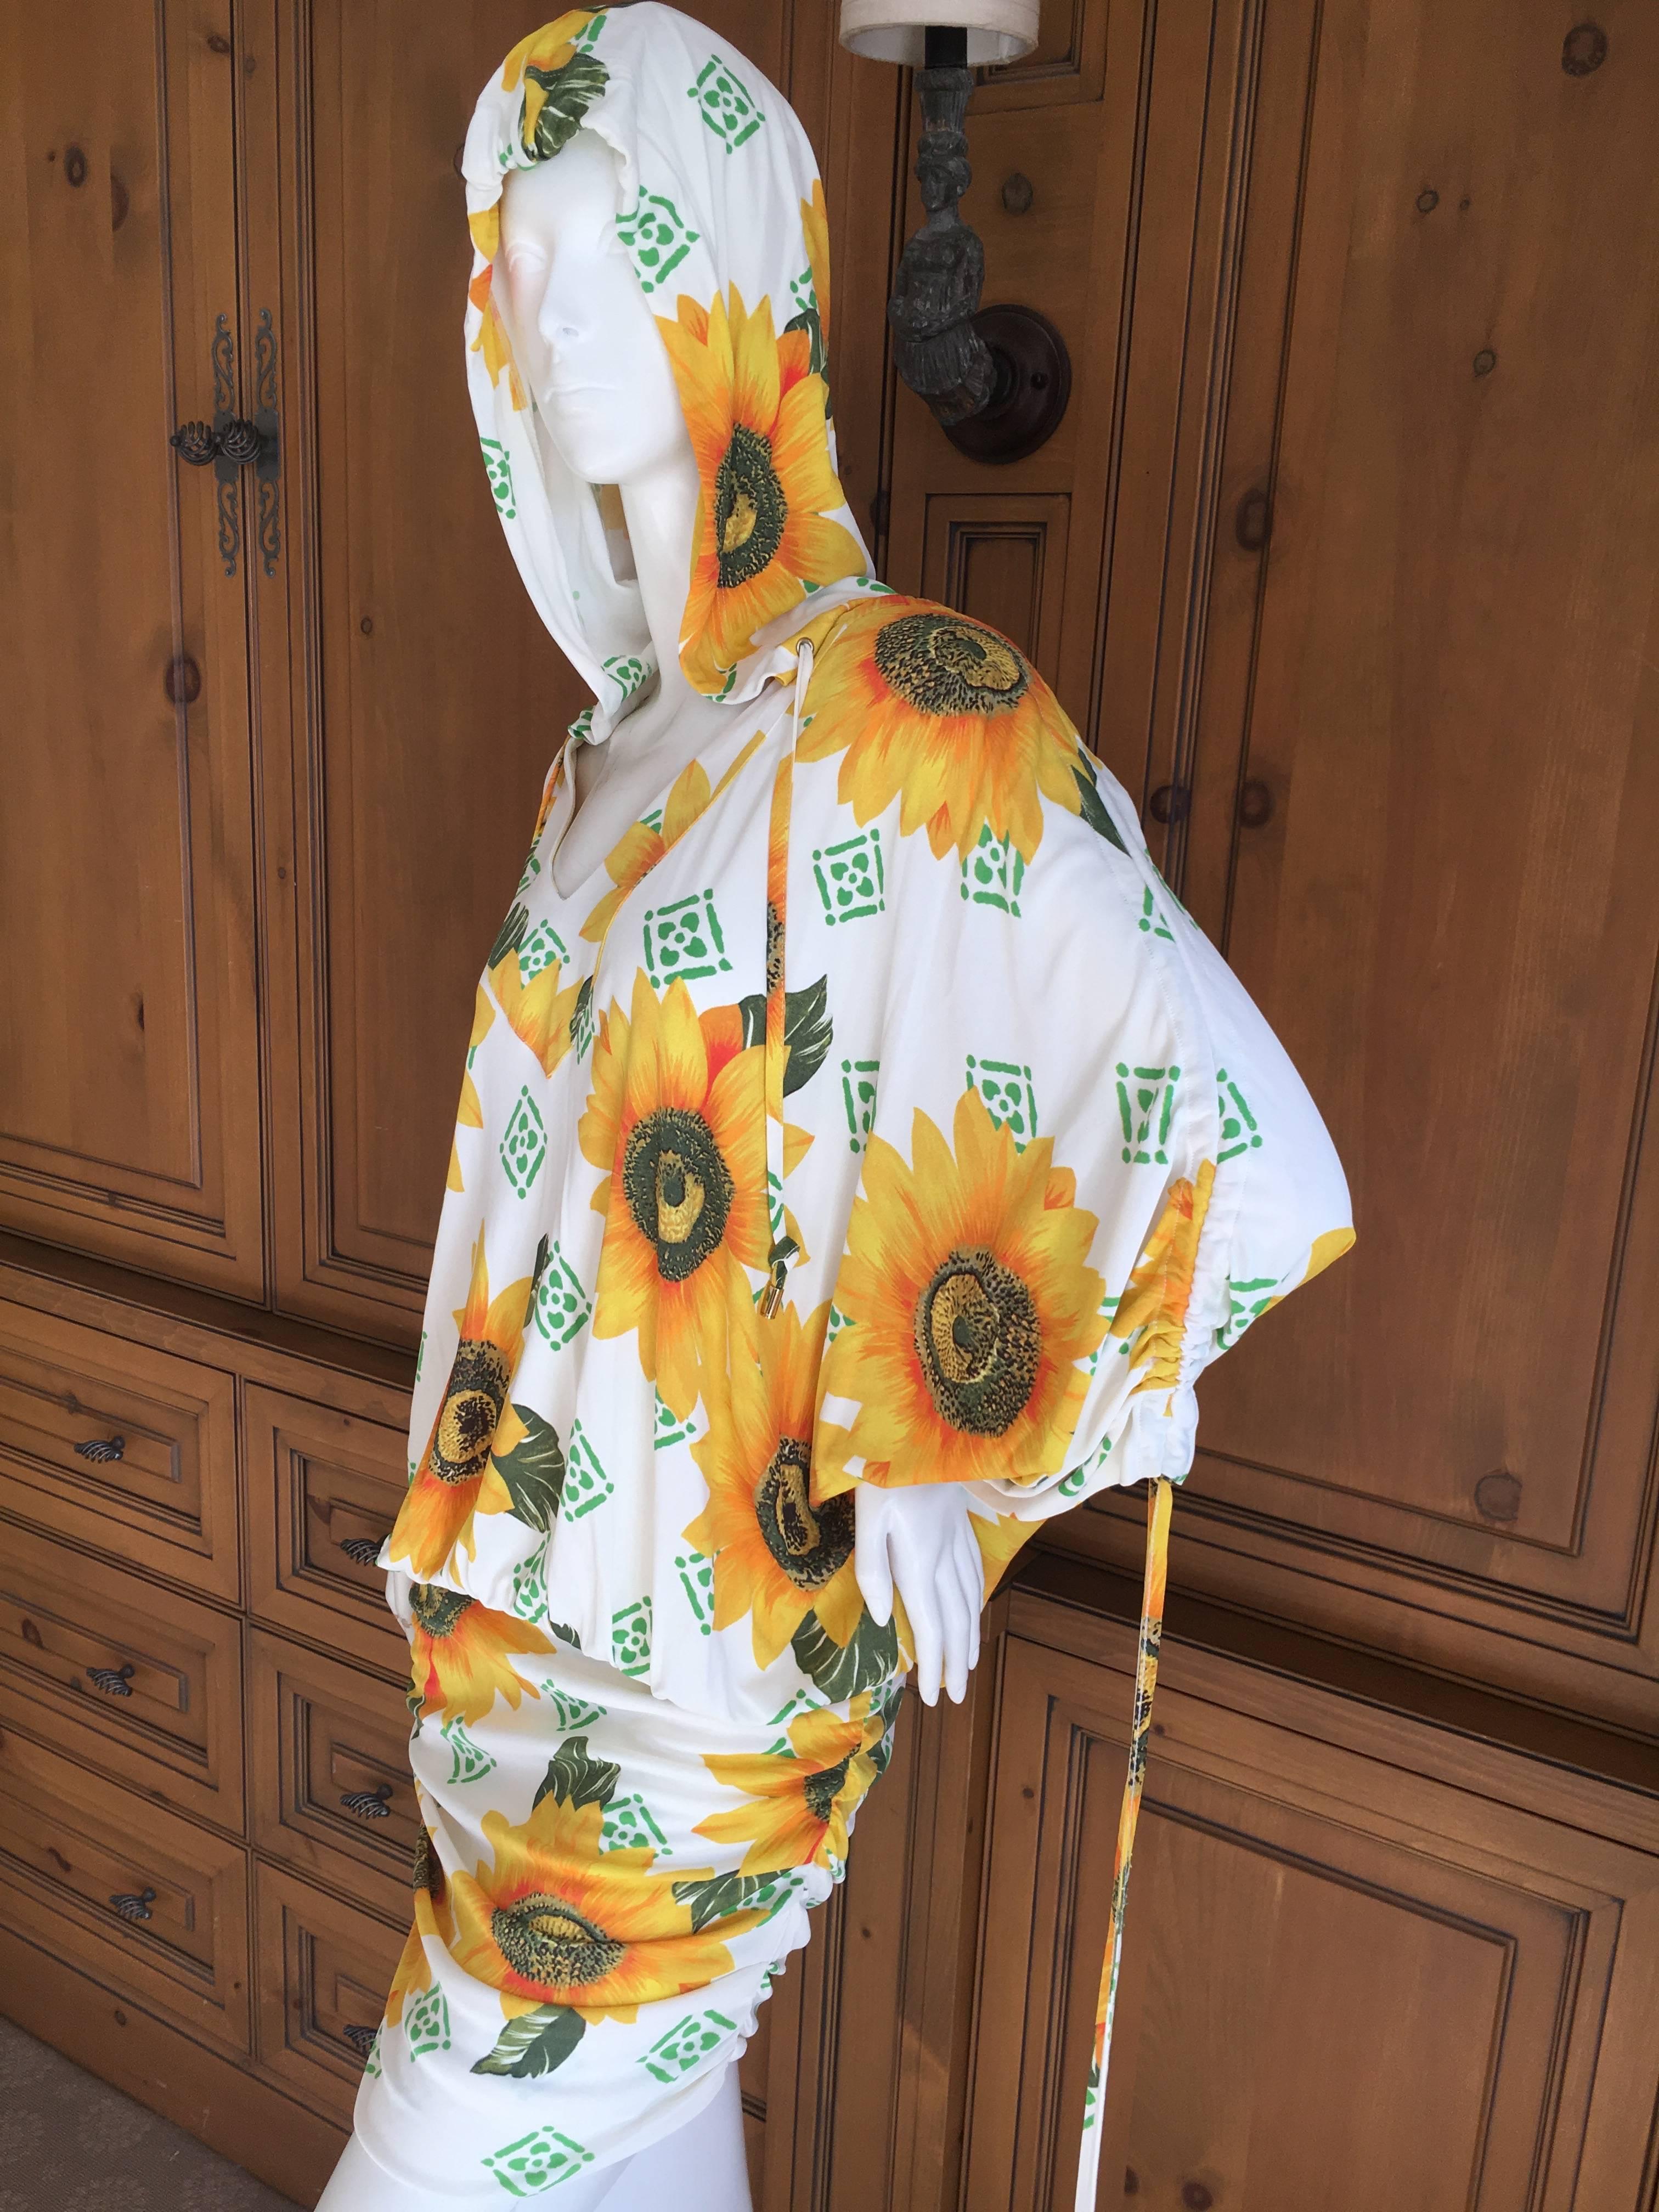 D&G Dolce & Gabbana Sunflower Dress with Hood.
Batwing sleeves 
Size Large
Bust 50